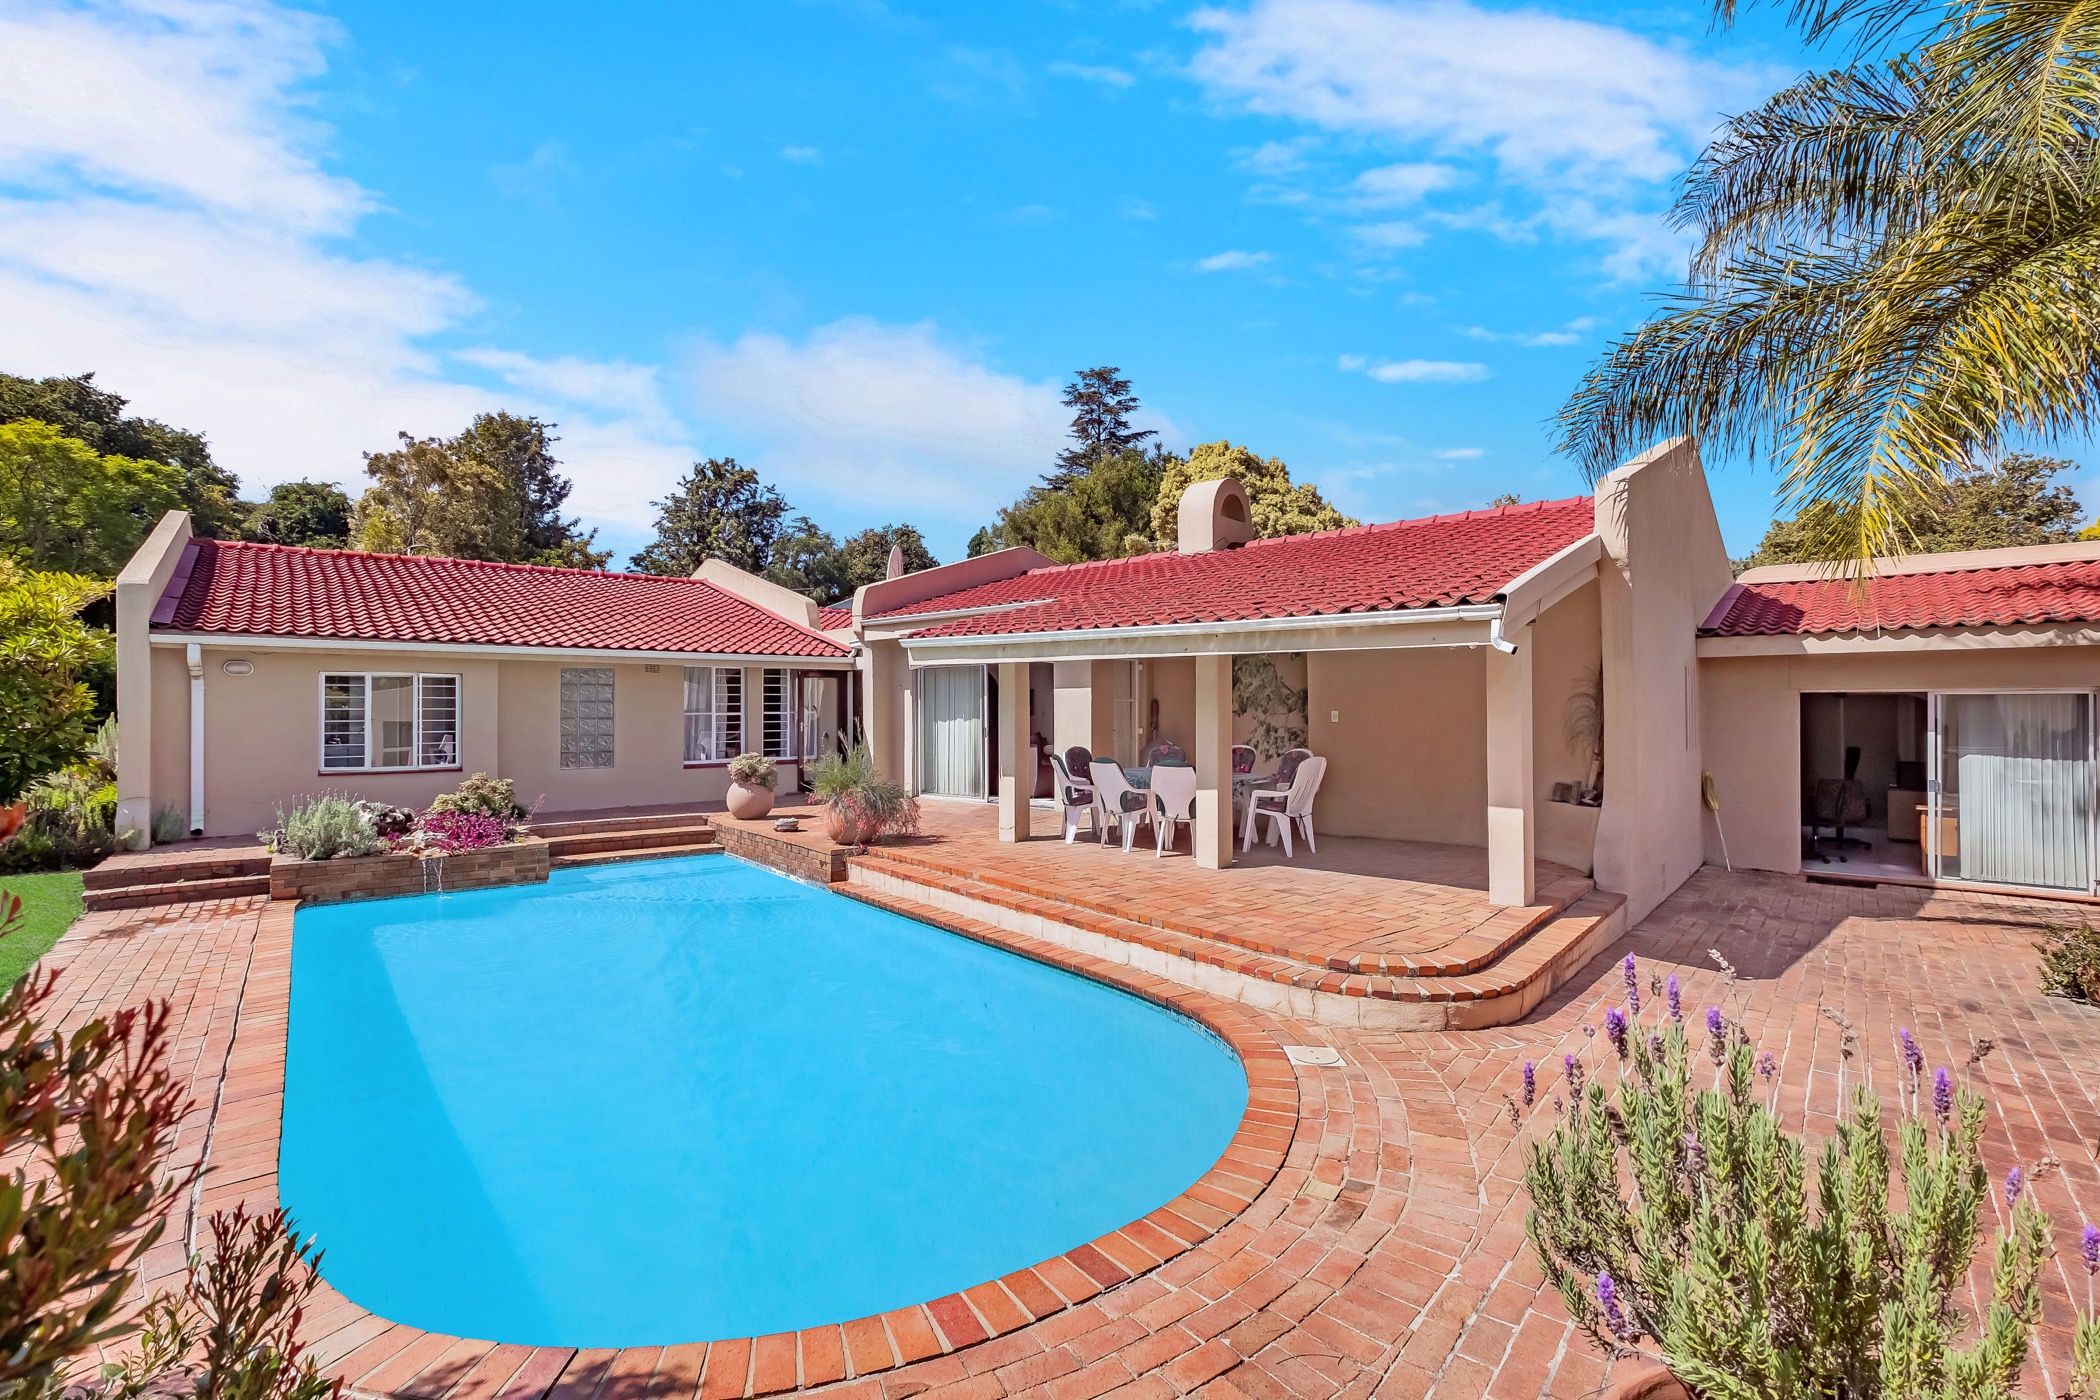 3 bedroom house for sale in River Club (Sandton)